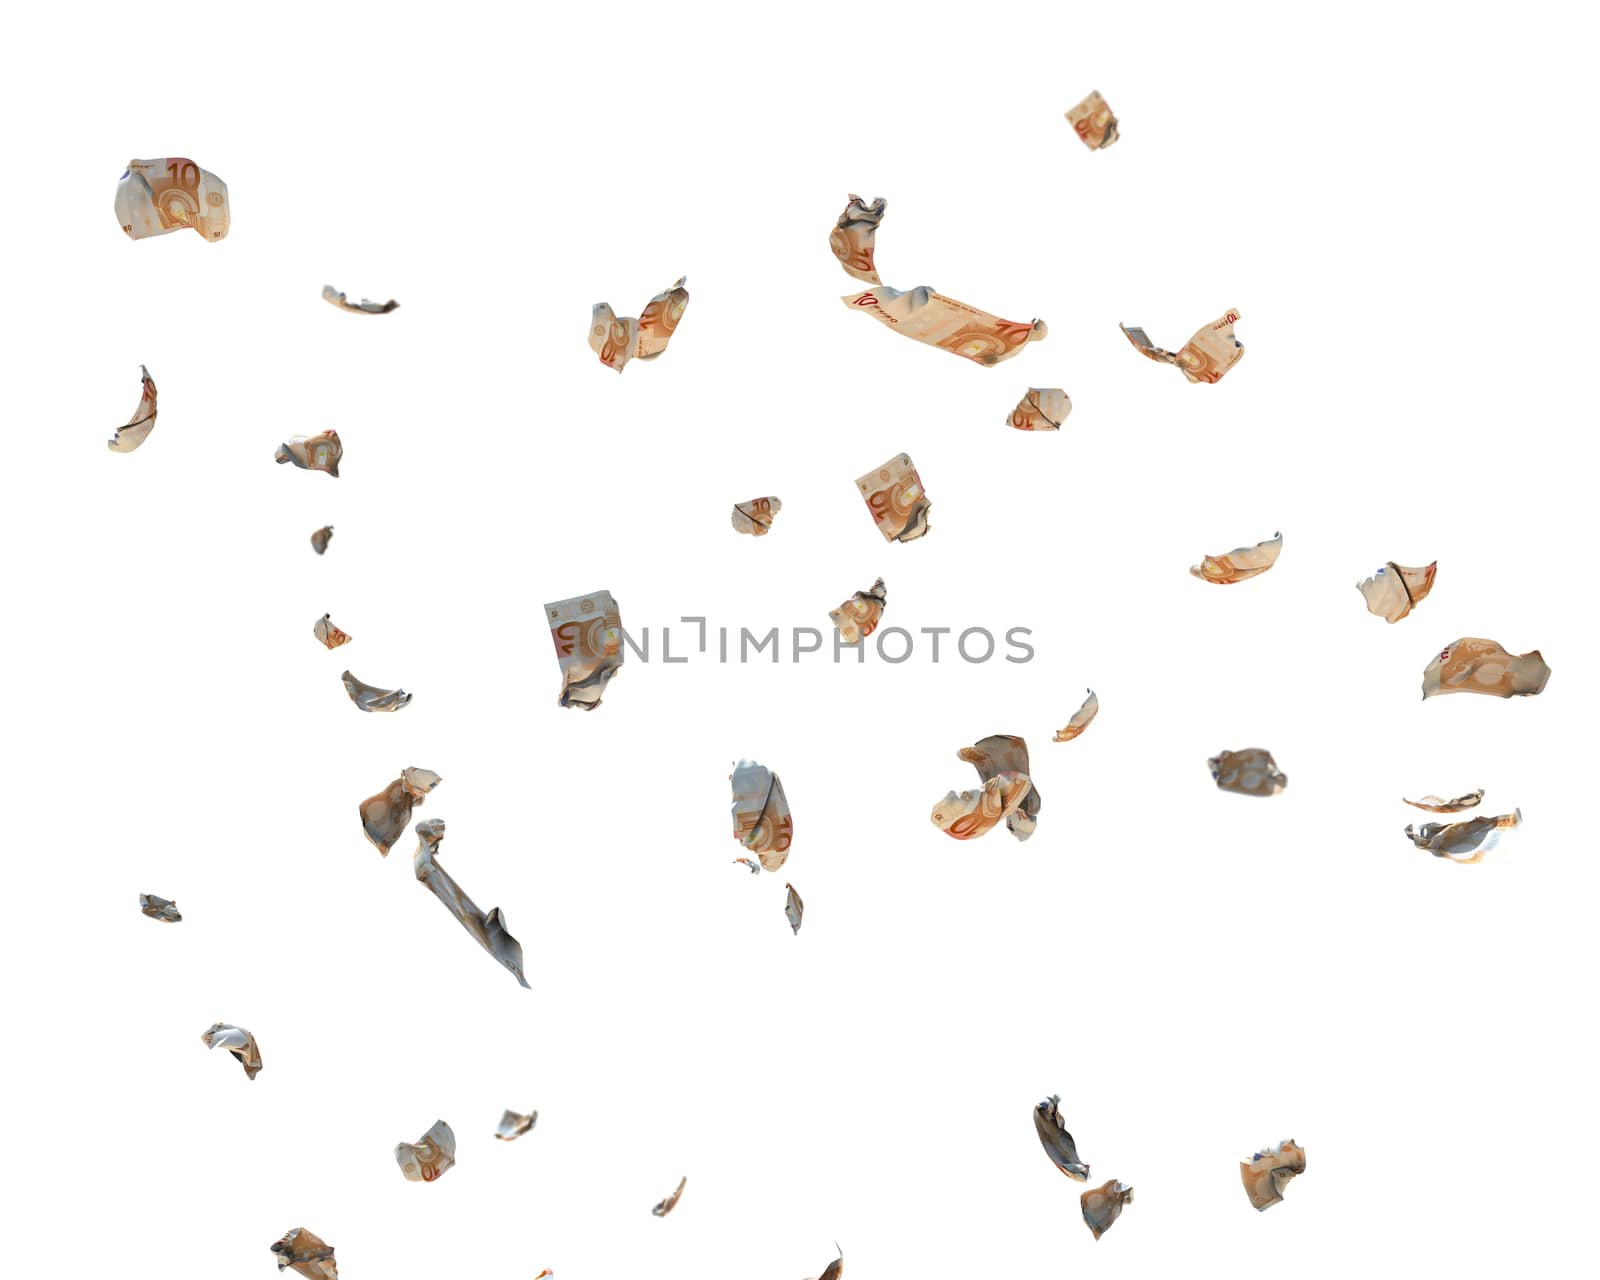 10 Euro Currency Crumpled Banknotes flying, against white, clipping path included